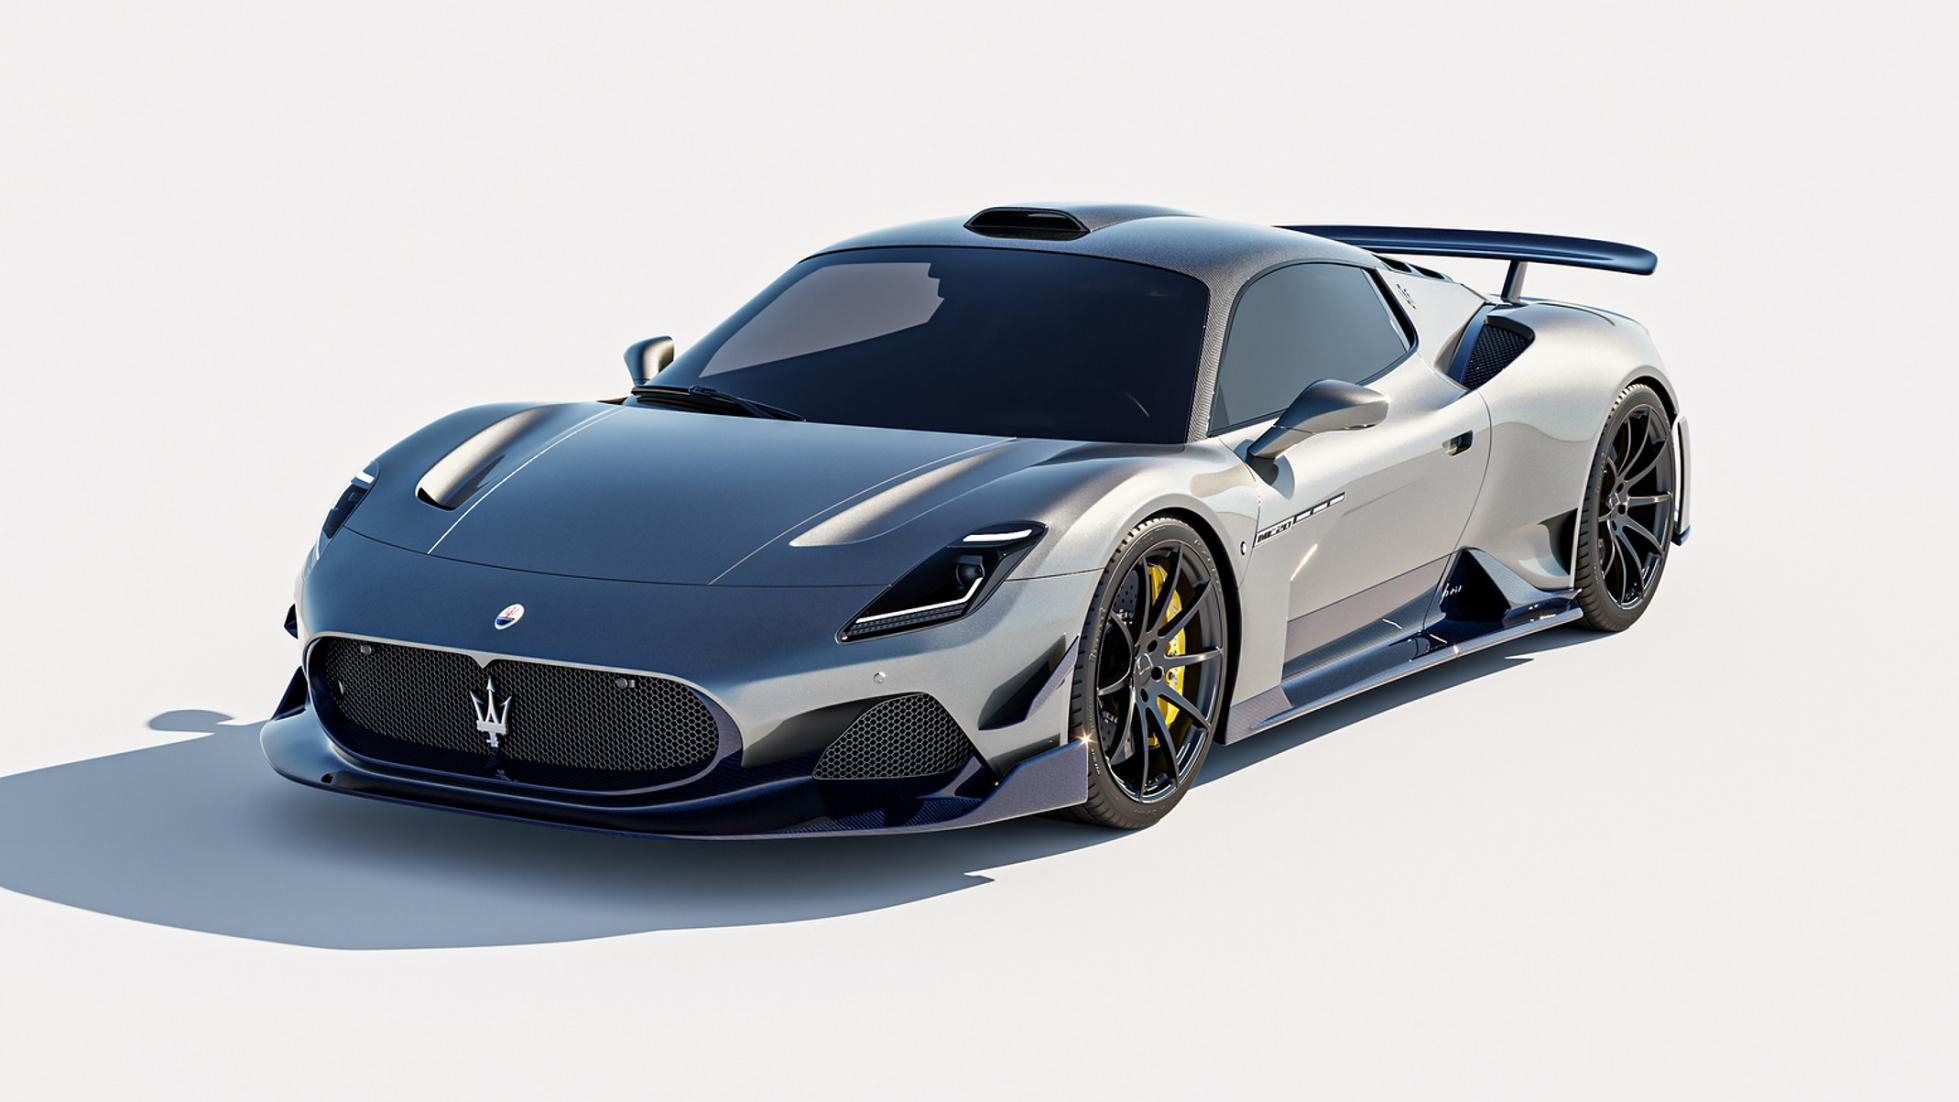 TopGear Do You Approve Of This Carbon Bodykitted Maserati MC20